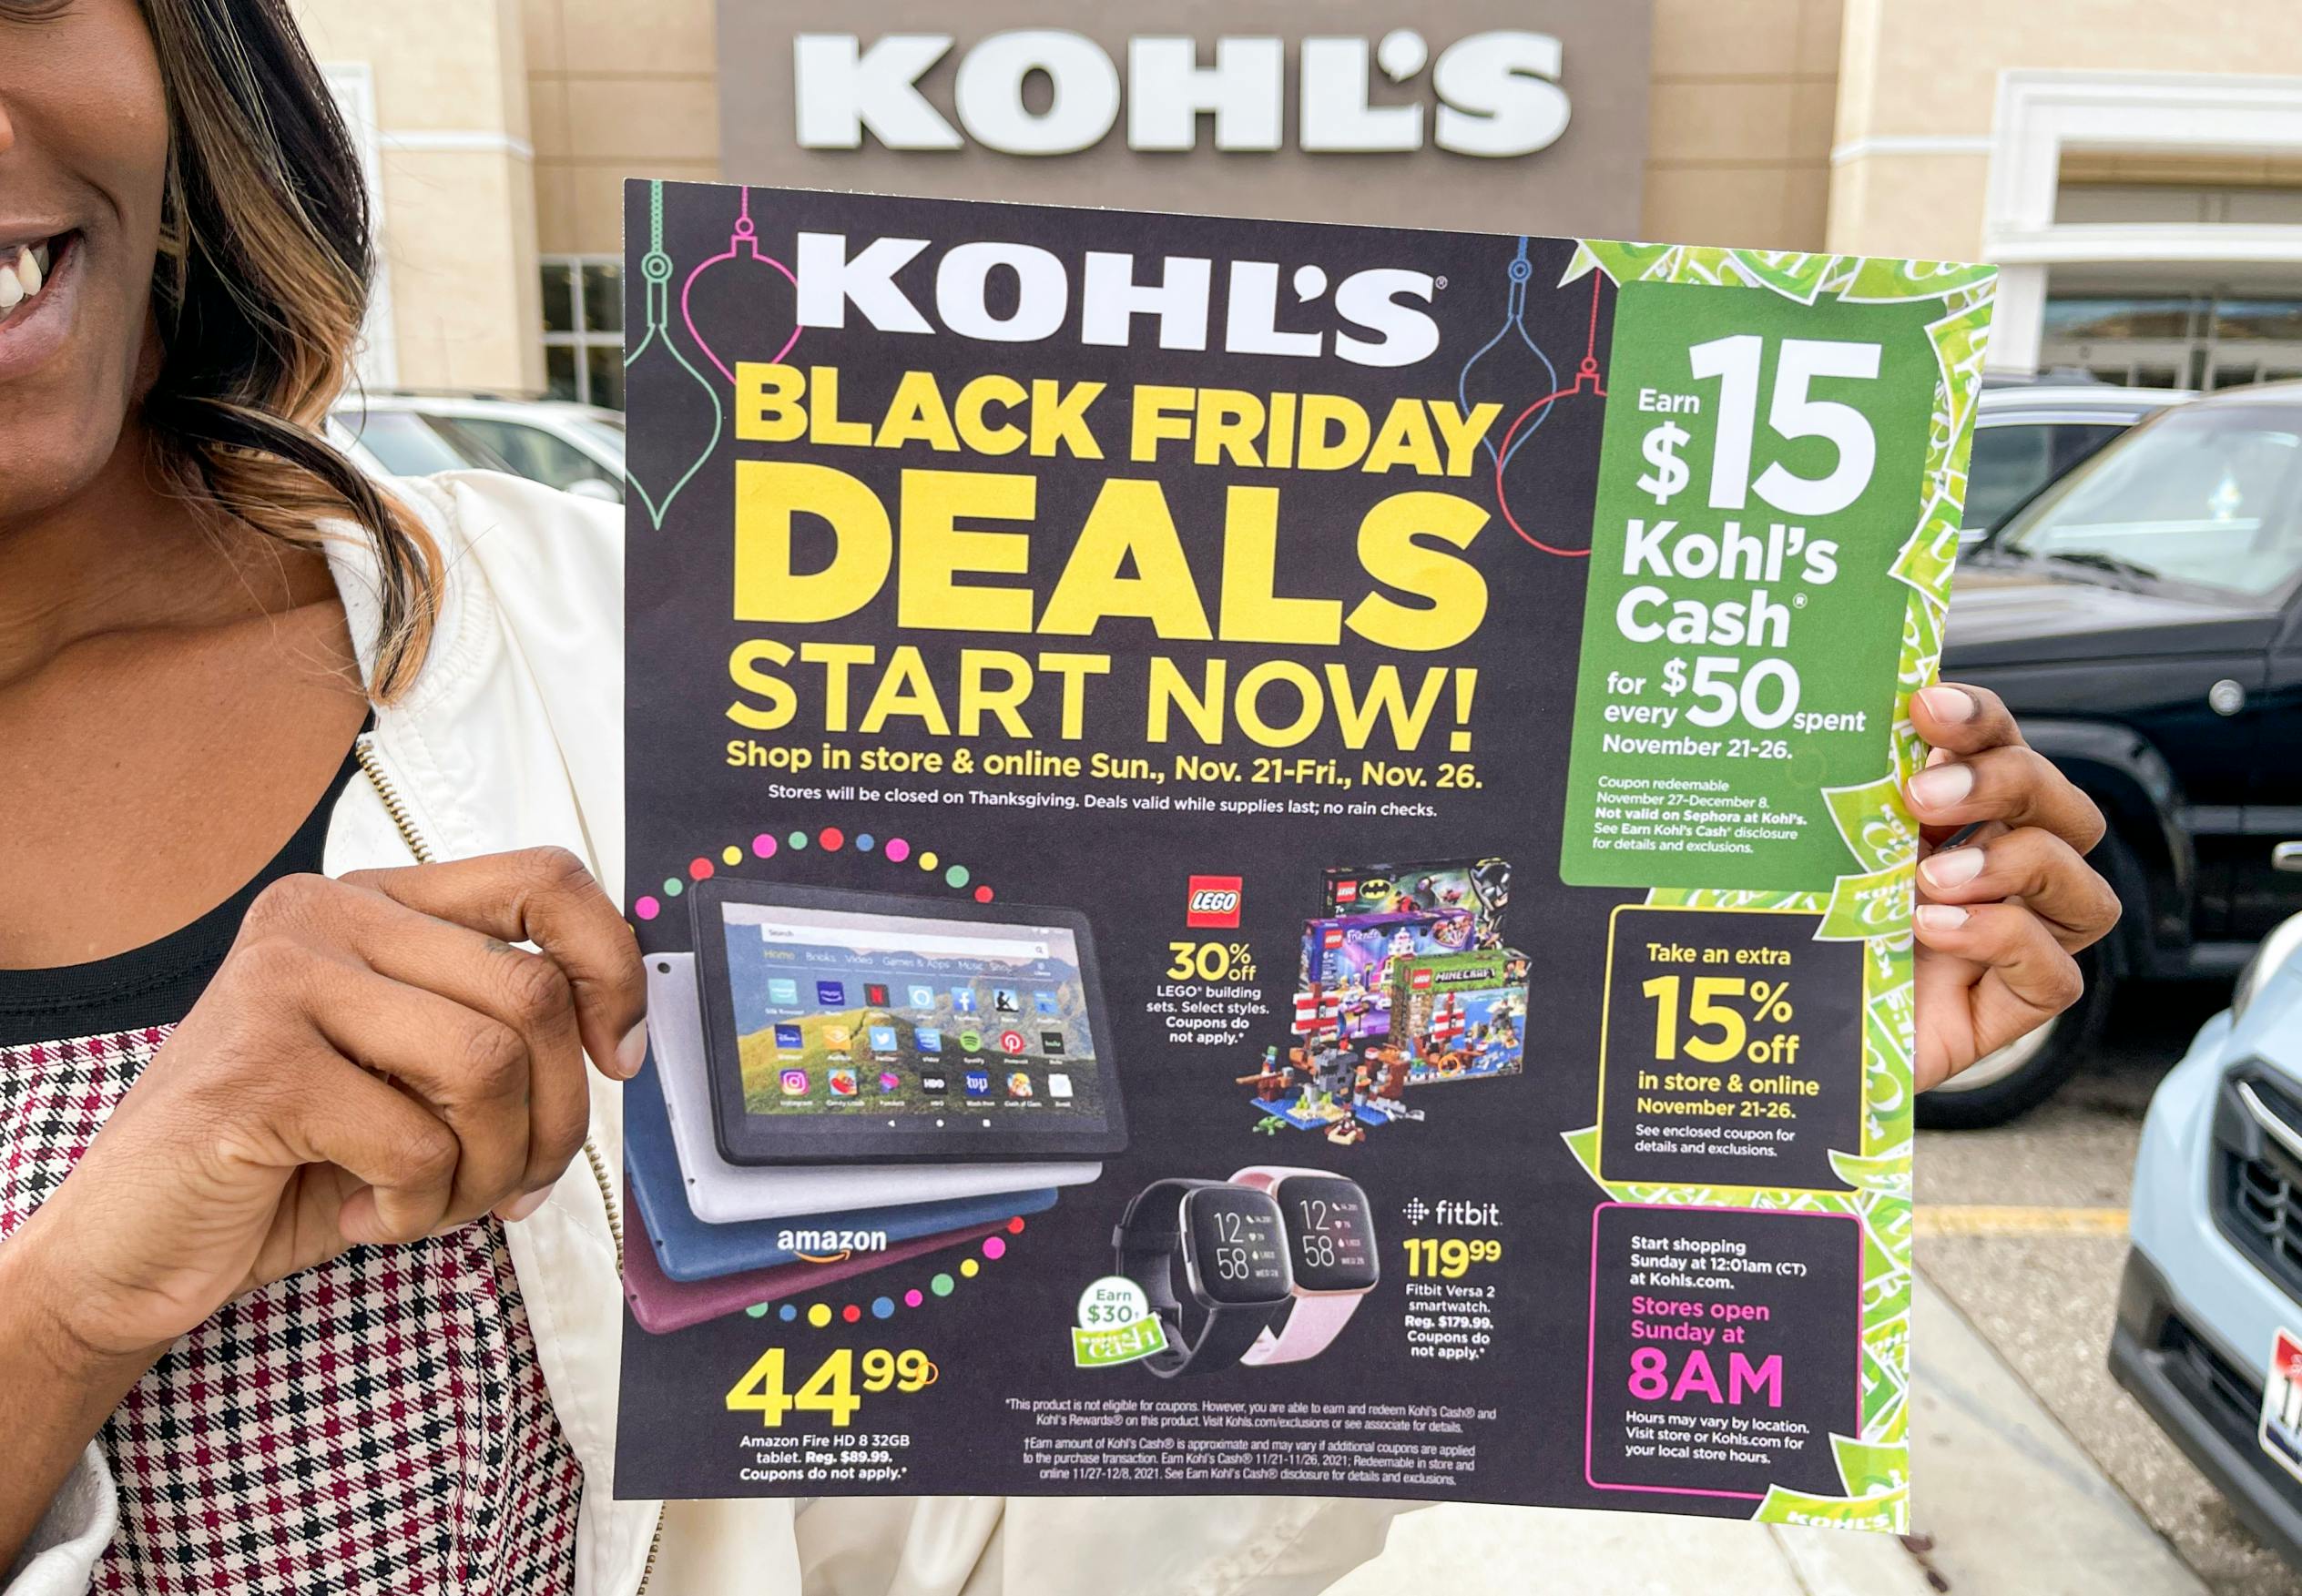 A woman holding a Kohl's Black Friday ad in front of a Kohl's storefront.